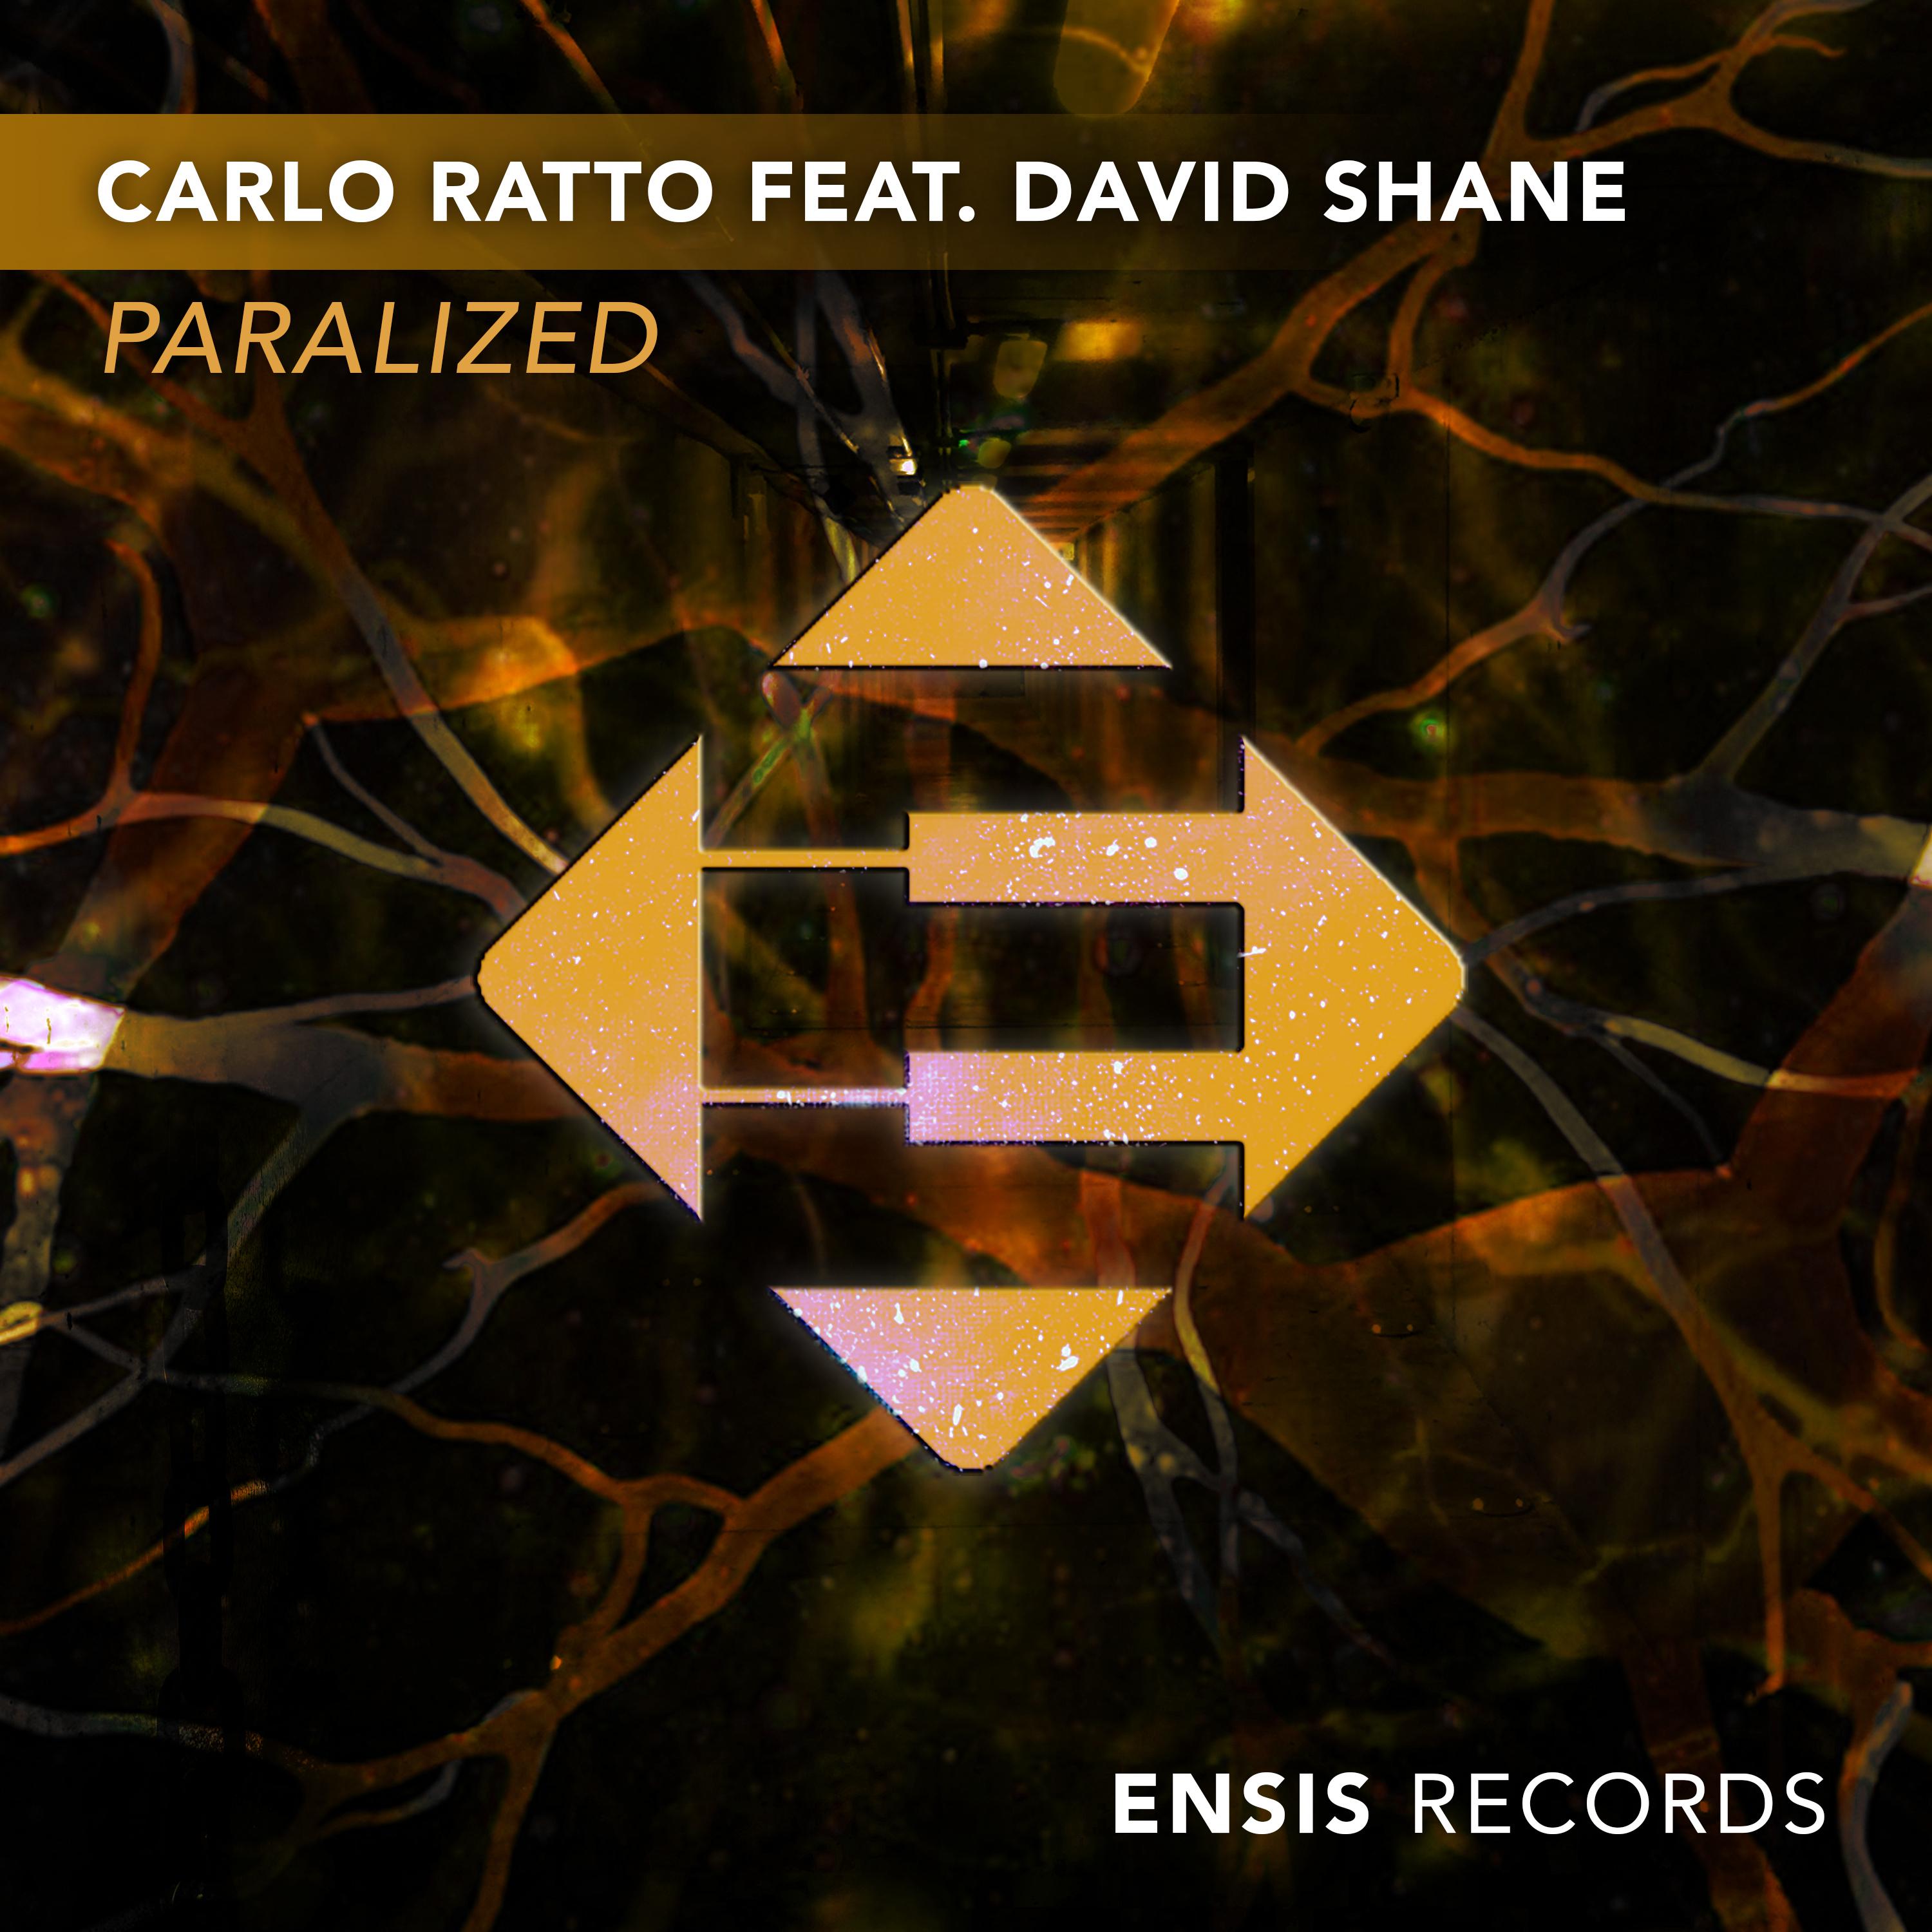 Carlo Ratto - Paralized